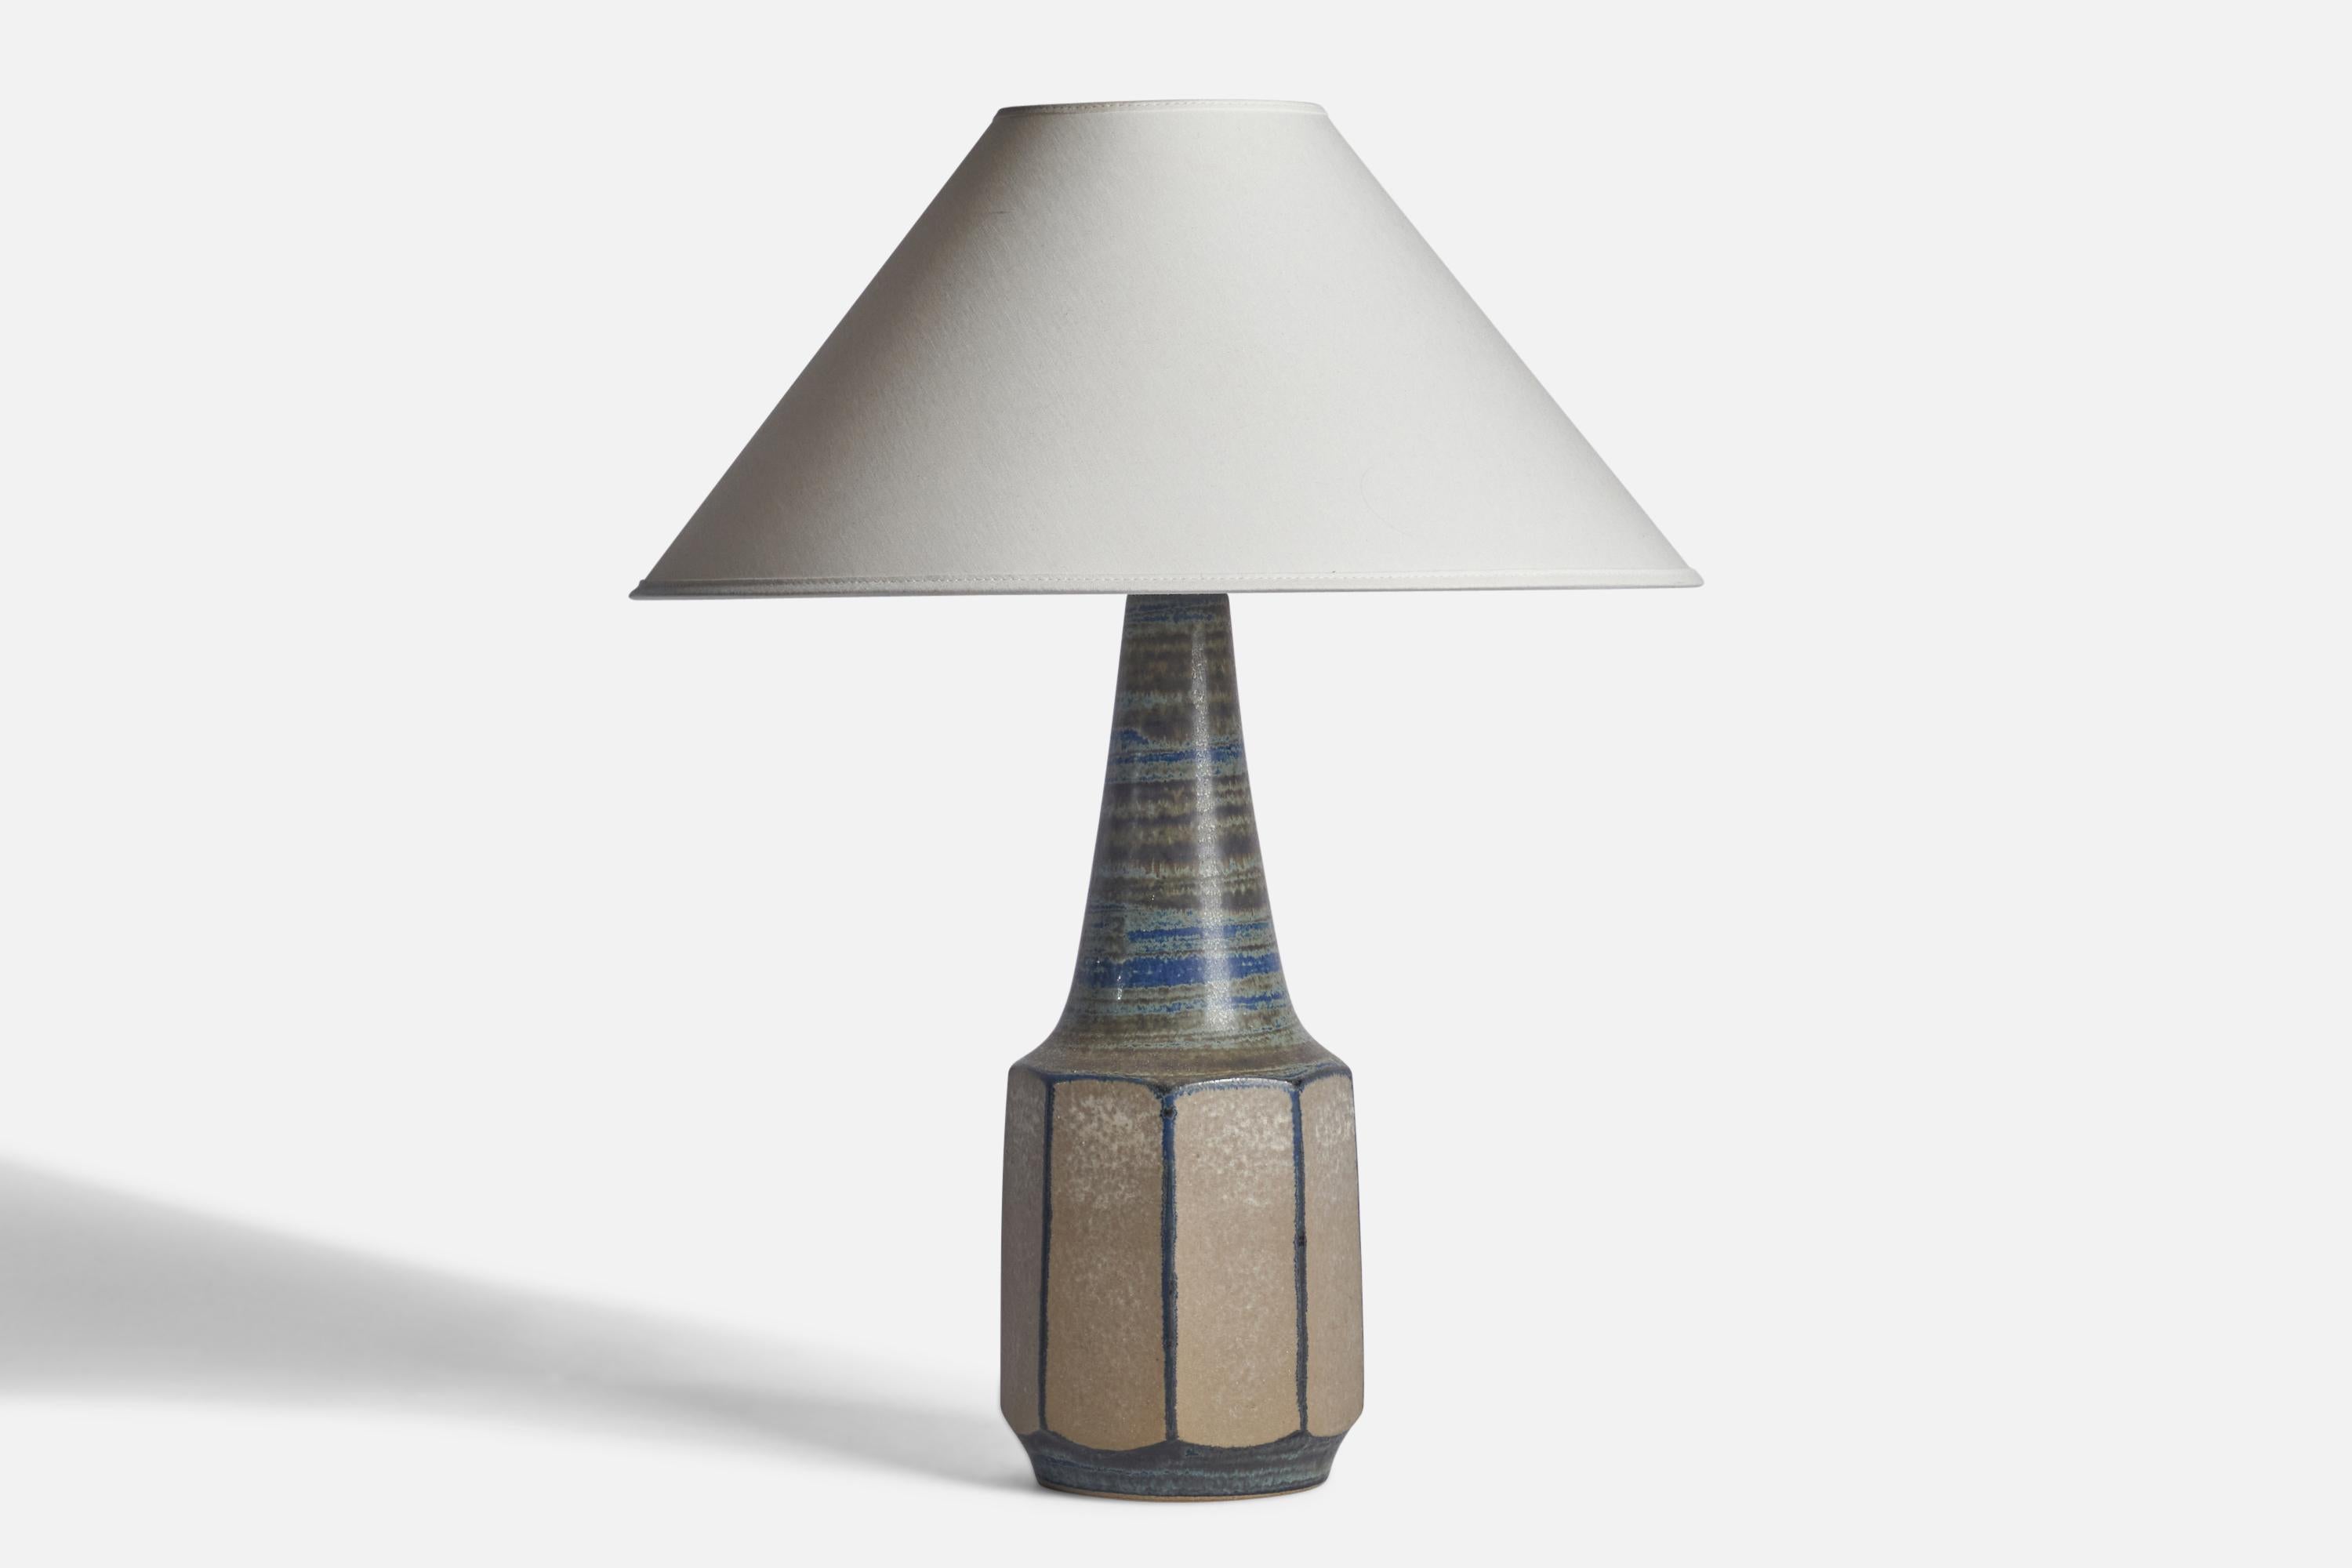 A blue-glazed stoneware table lamp designed by Marianne Starck and produced by Michael Andersen, Bornholm, Denmark, 1960s.

Dimensions of Lamp (inches): 16.25” H x 5.25” Diameter
Dimensions of Shade (inches): 4.5” Top Diameter x 16” Bottom Diameter